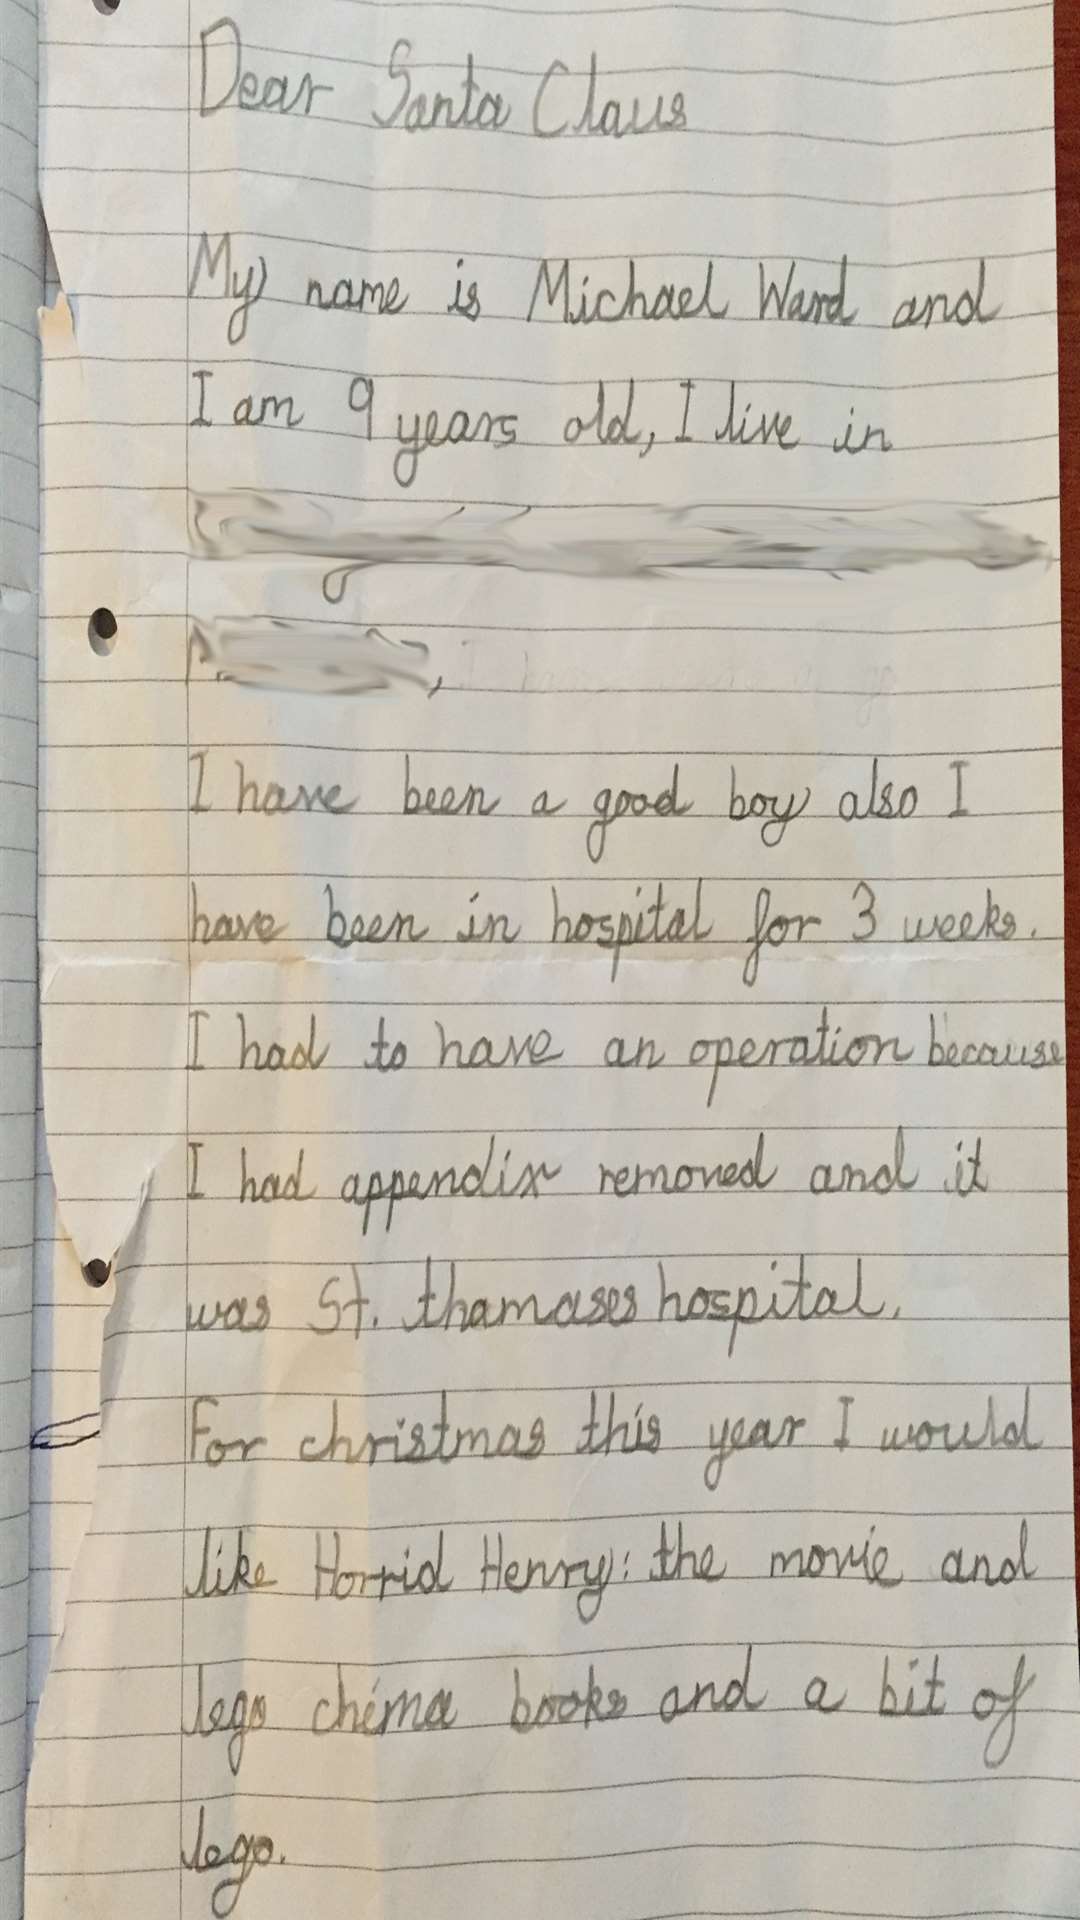 Michael's touching letter to Santa